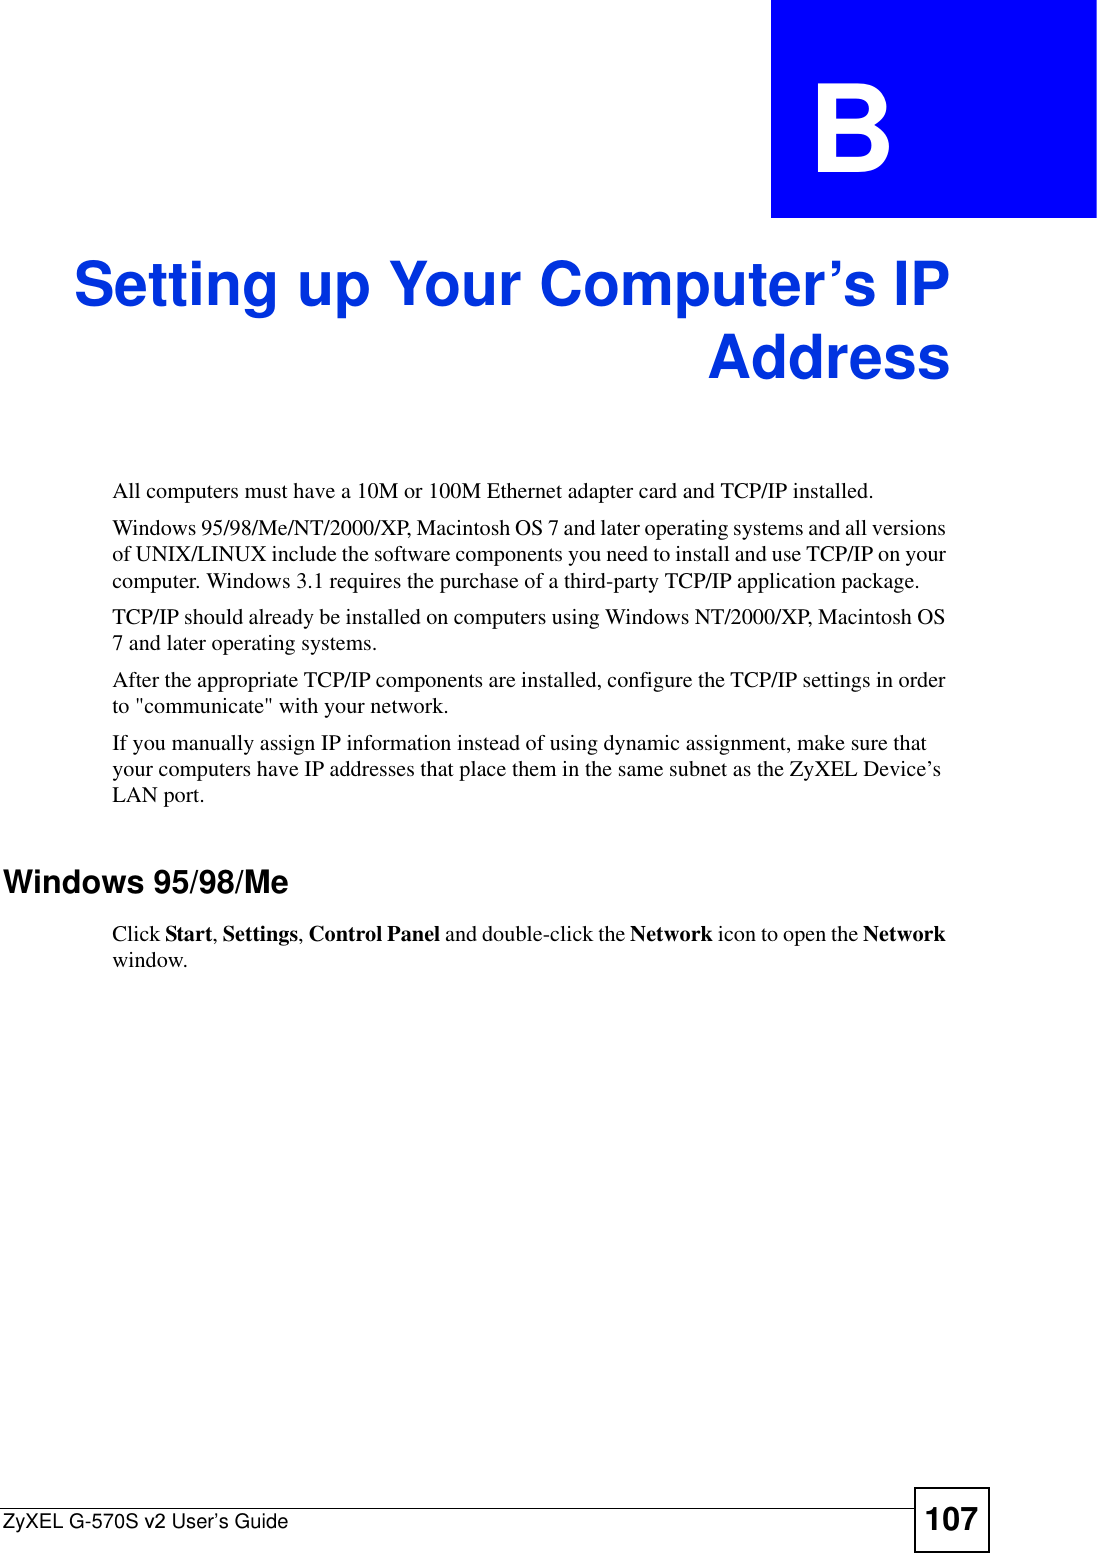 ZyXEL G-570S v2 User’s Guide 107APPENDIX  B Setting up Your Computer’s IPAddressAll computers must have a 10M or 100M Ethernet adapter card and TCP/IP installed. Windows 95/98/Me/NT/2000/XP, Macintosh OS 7 and later operating systems and all versions of UNIX/LINUX include the software components you need to install and use TCP/IP on your computer. Windows 3.1 requires the purchase of a third-party TCP/IP application package.TCP/IP should already be installed on computers using Windows NT/2000/XP, Macintosh OS 7 and later operating systems.After the appropriate TCP/IP components are installed, configure the TCP/IP settings in order to &quot;communicate&quot; with your network. If you manually assign IP information instead of using dynamic assignment, make sure that your computers have IP addresses that place them in the same subnet as the ZyXEL Device’s LAN port.Windows 95/98/MeClick Start,Settings,Control Panel and double-click the Network icon to open the Network window.